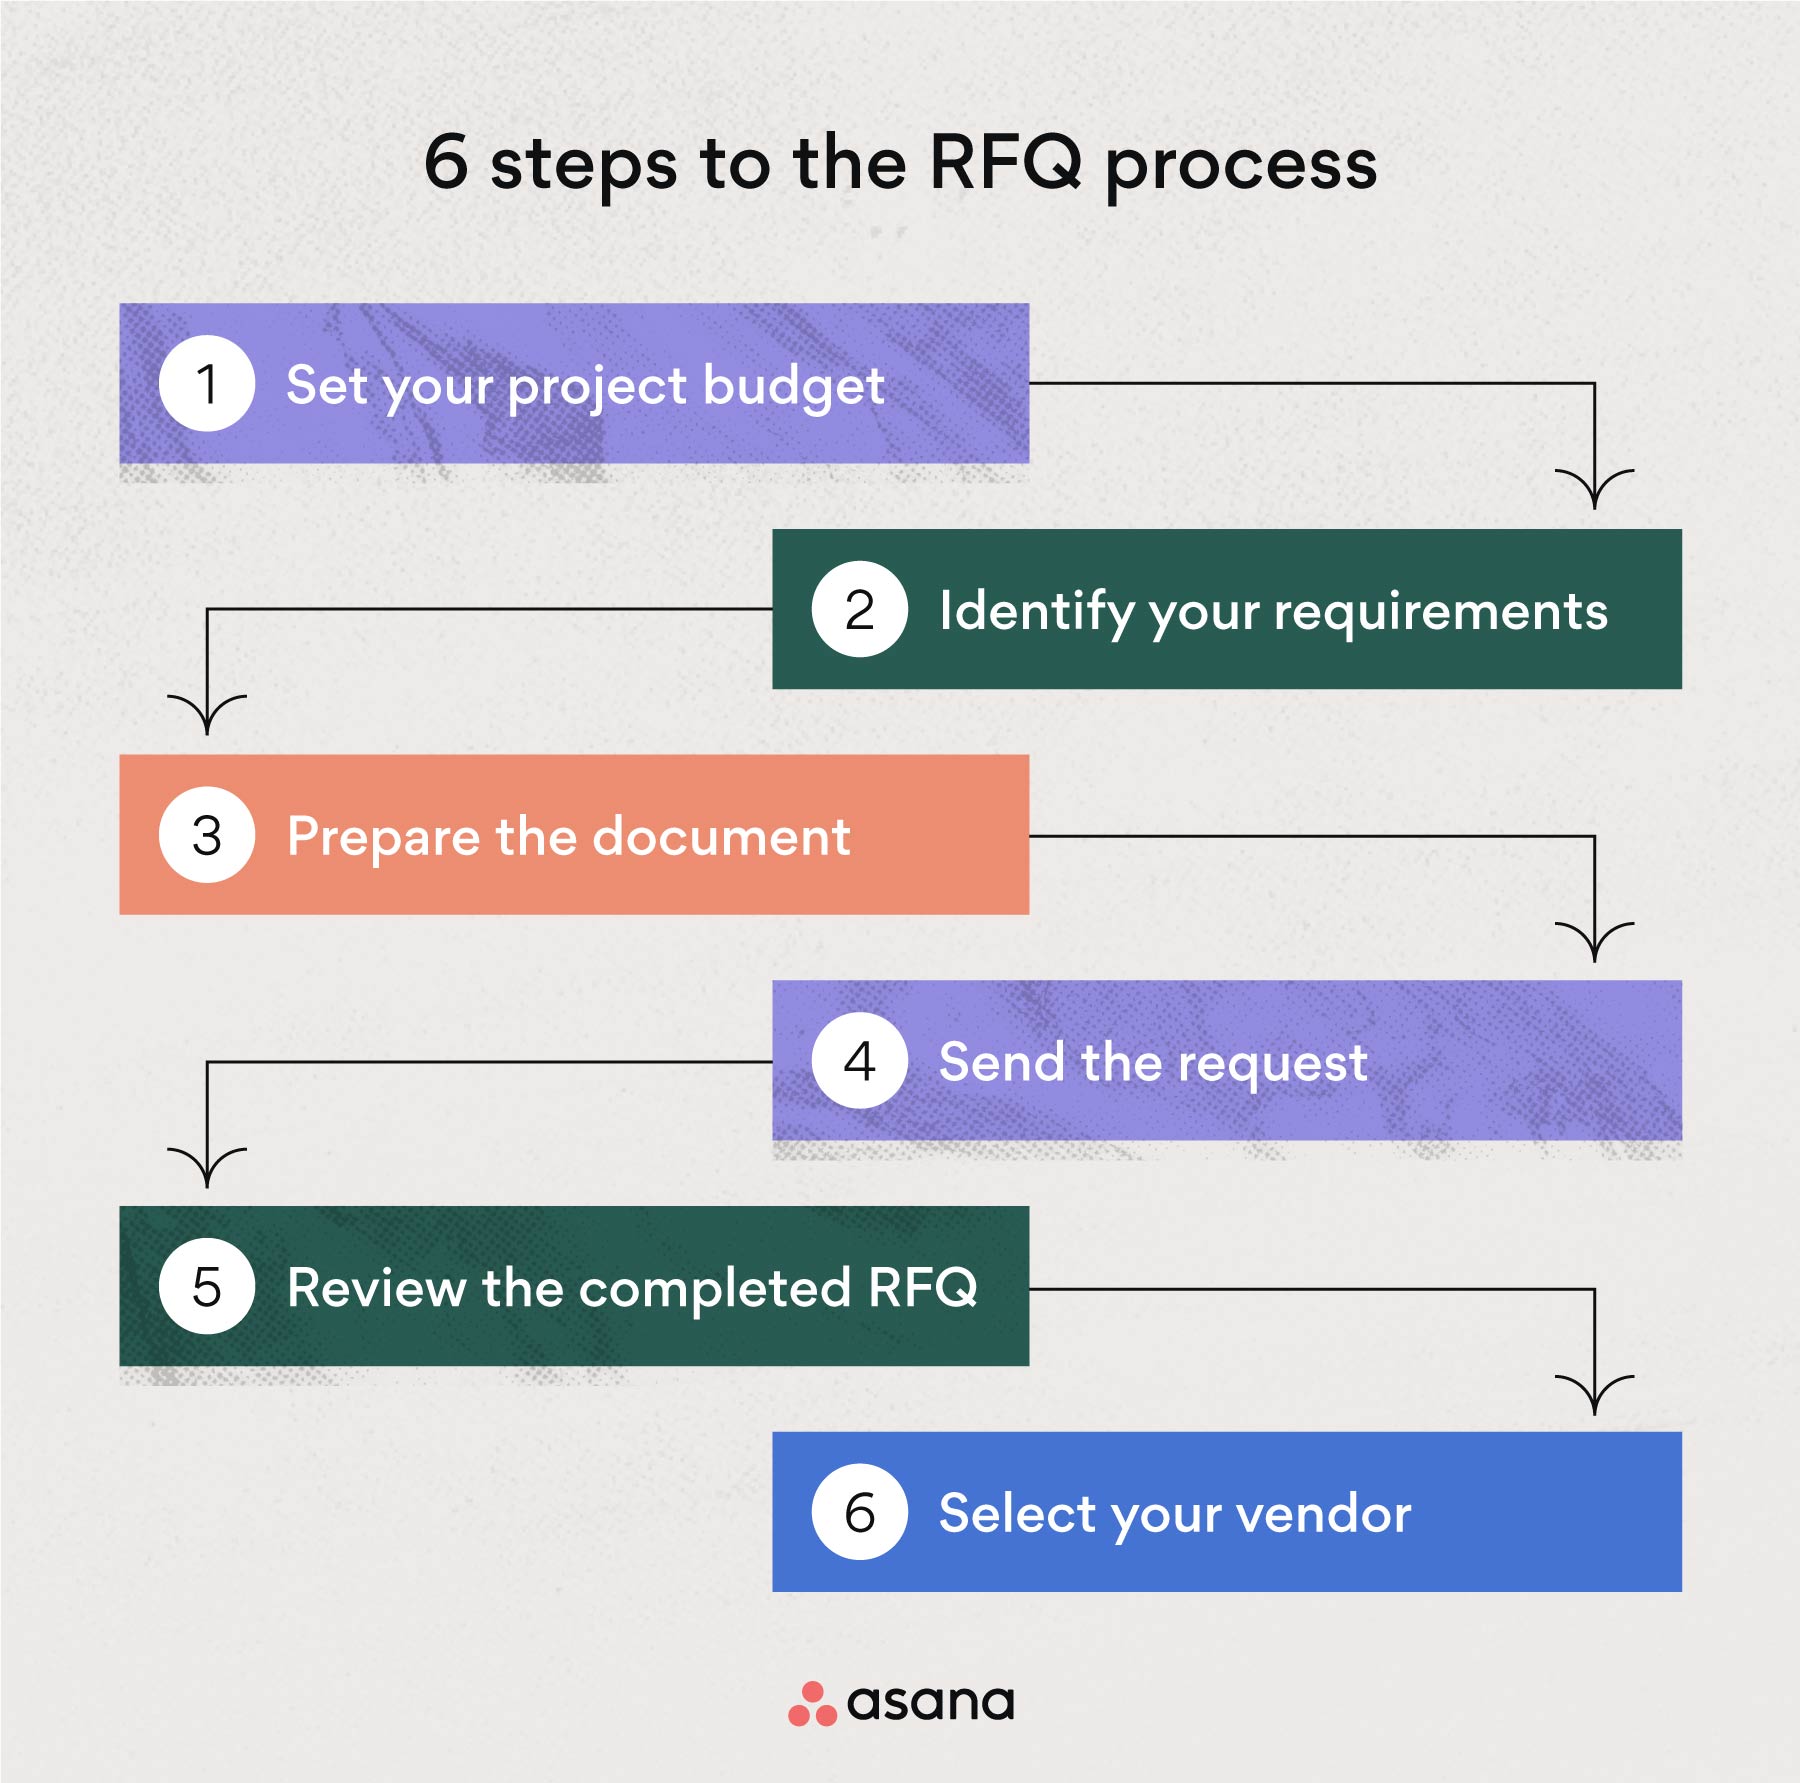 [inline illustration] 6 steps to the RFQ process (infographic)